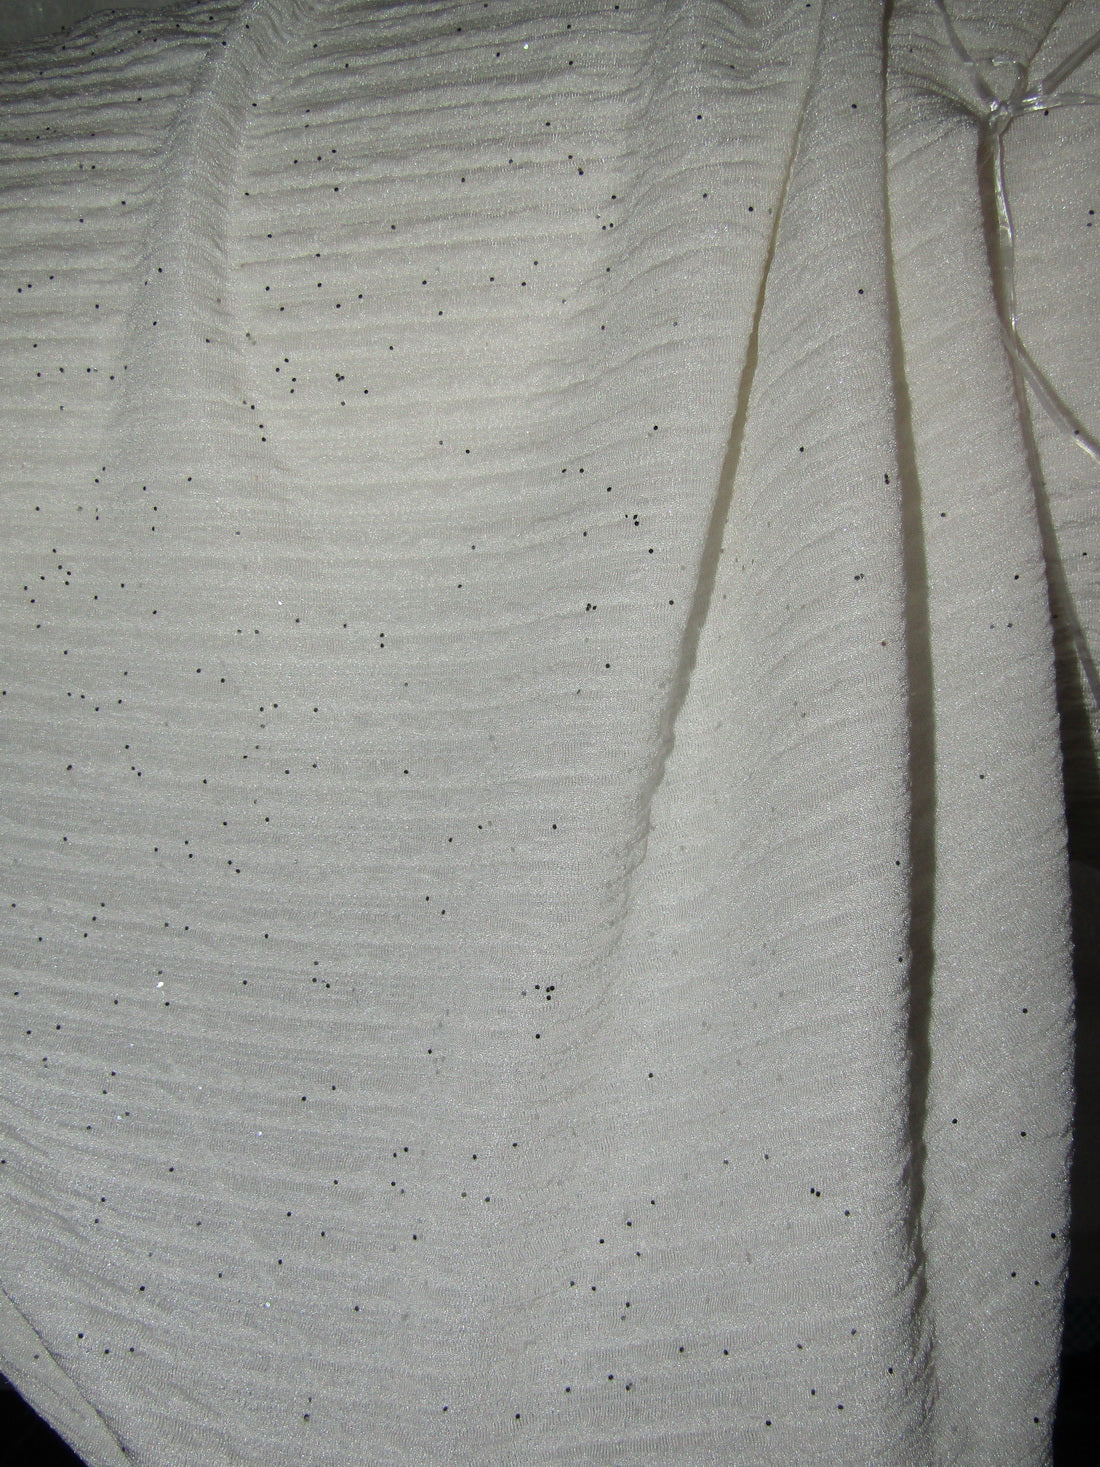 LYCRA Crushed polyester shimmer fabric WHITE color 58" wide FF26